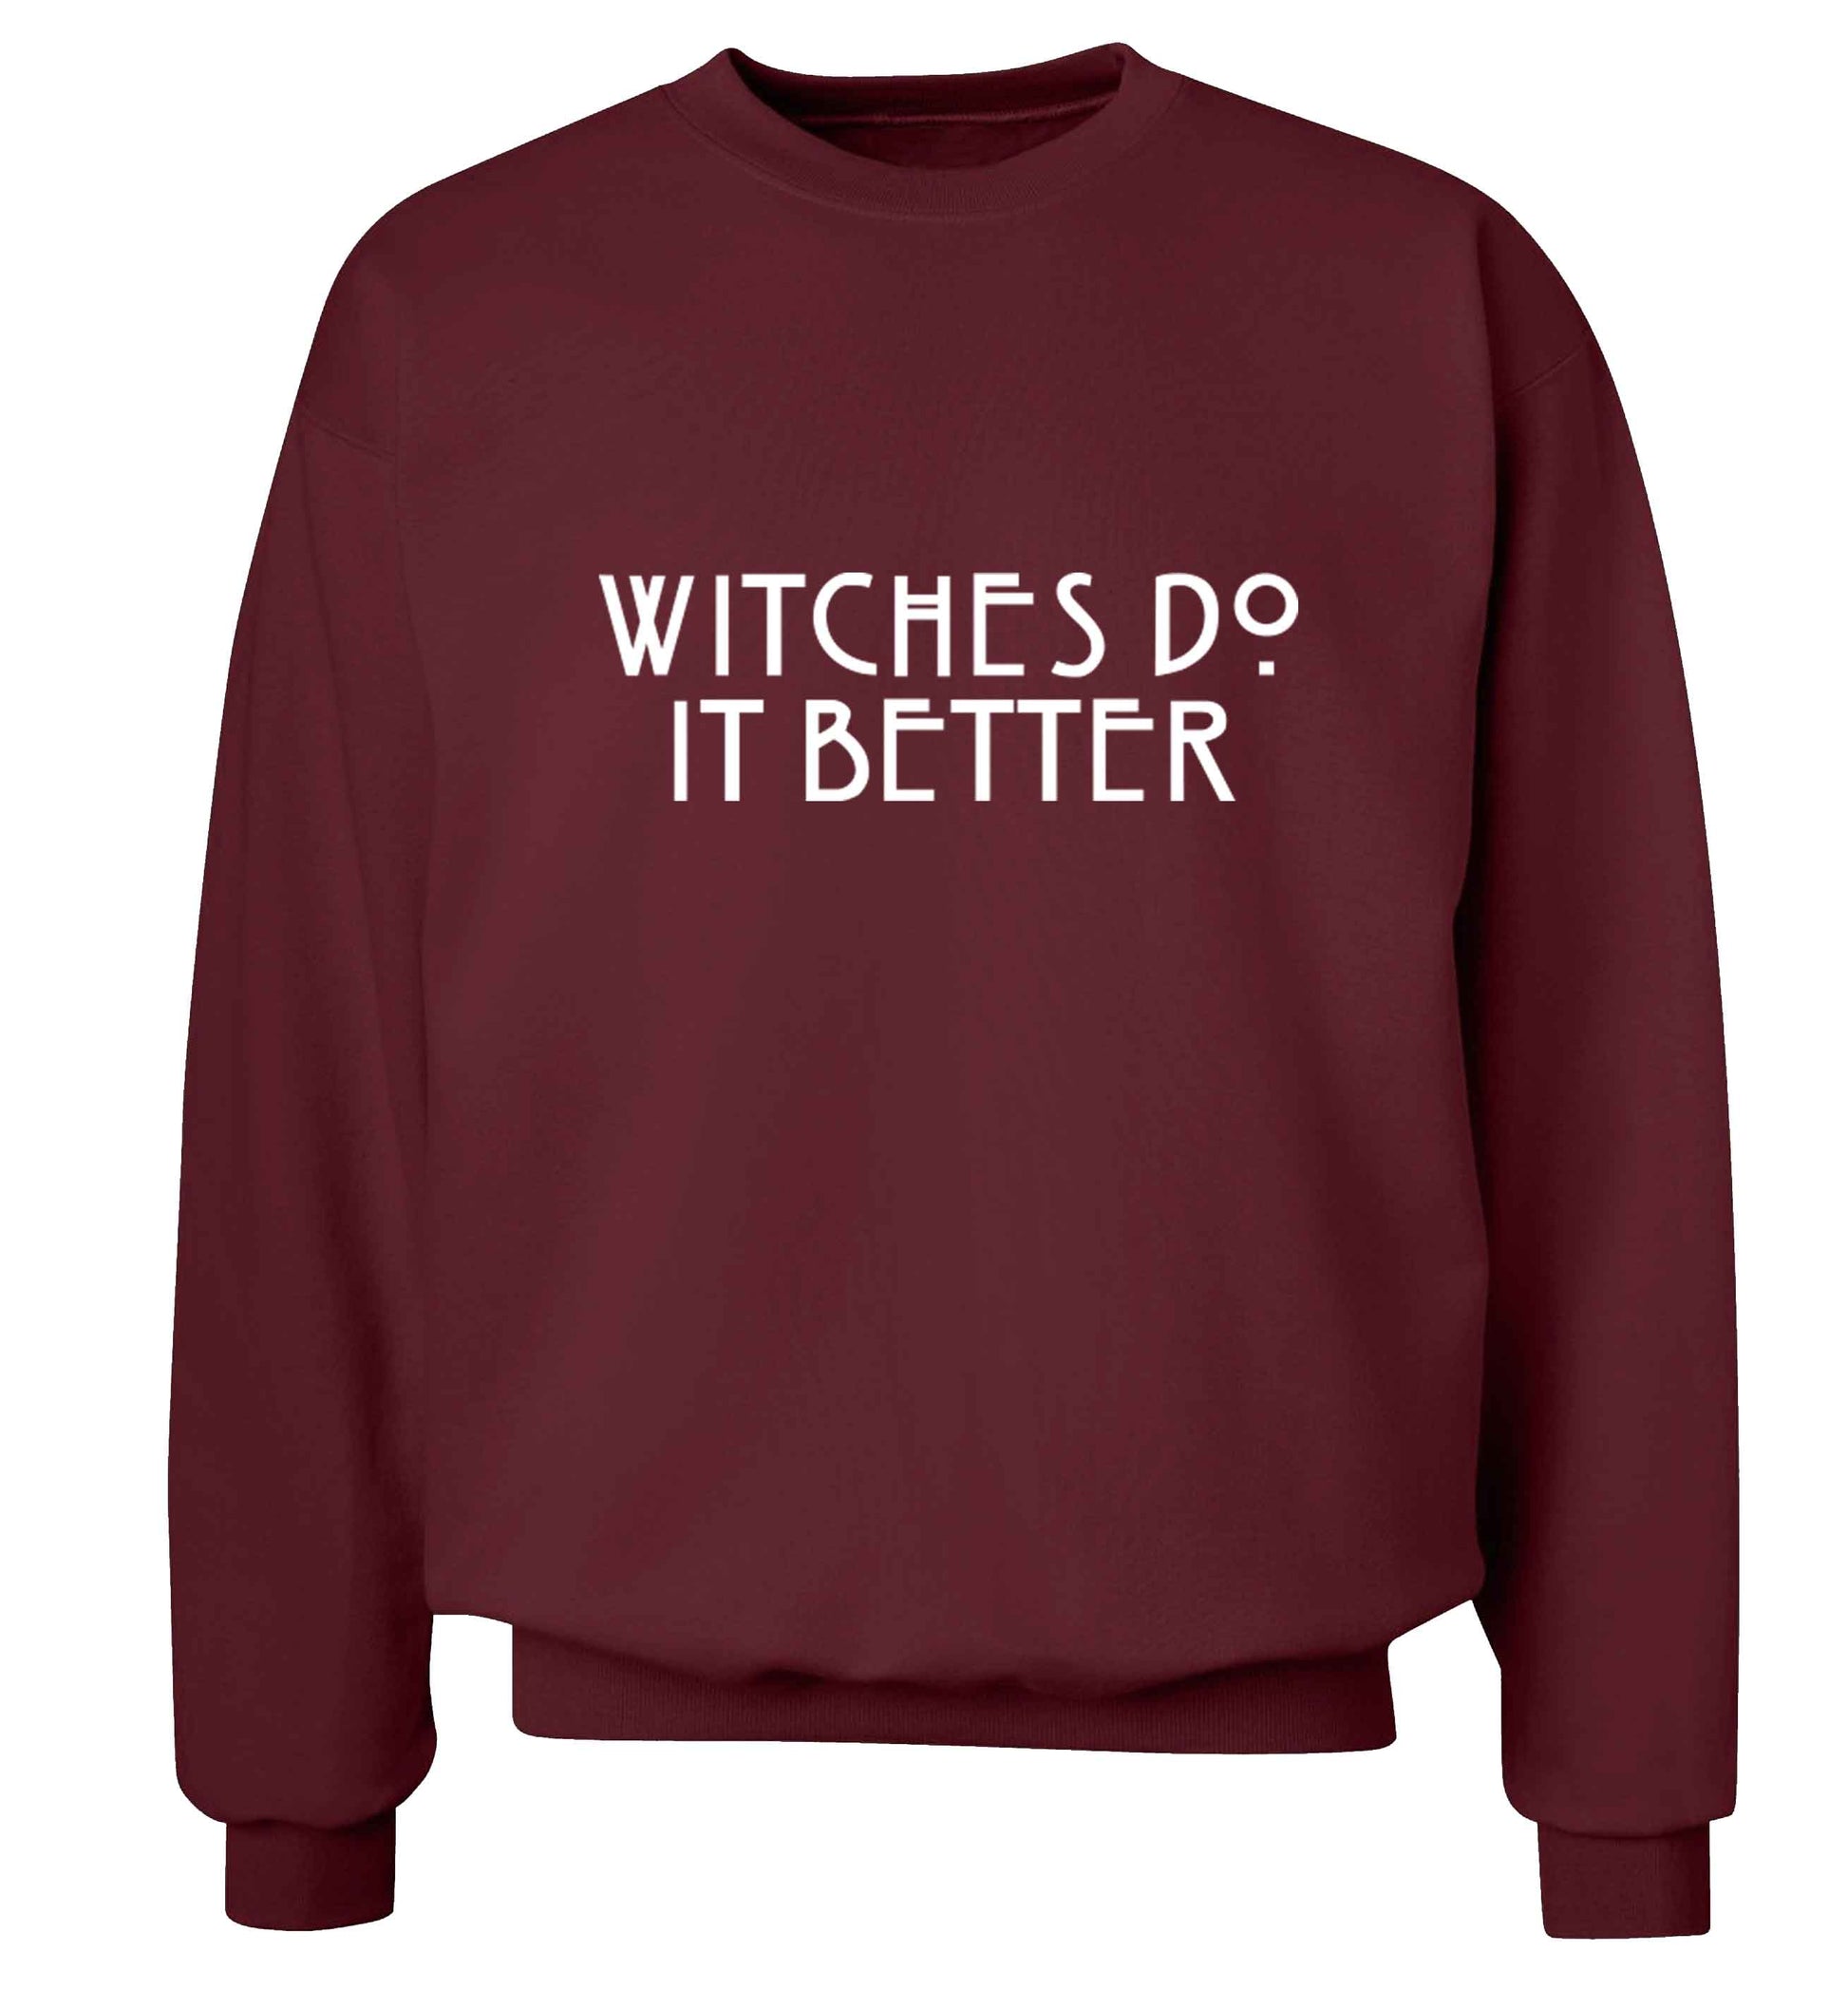 Witches do it better adult's unisex maroon sweater 2XL